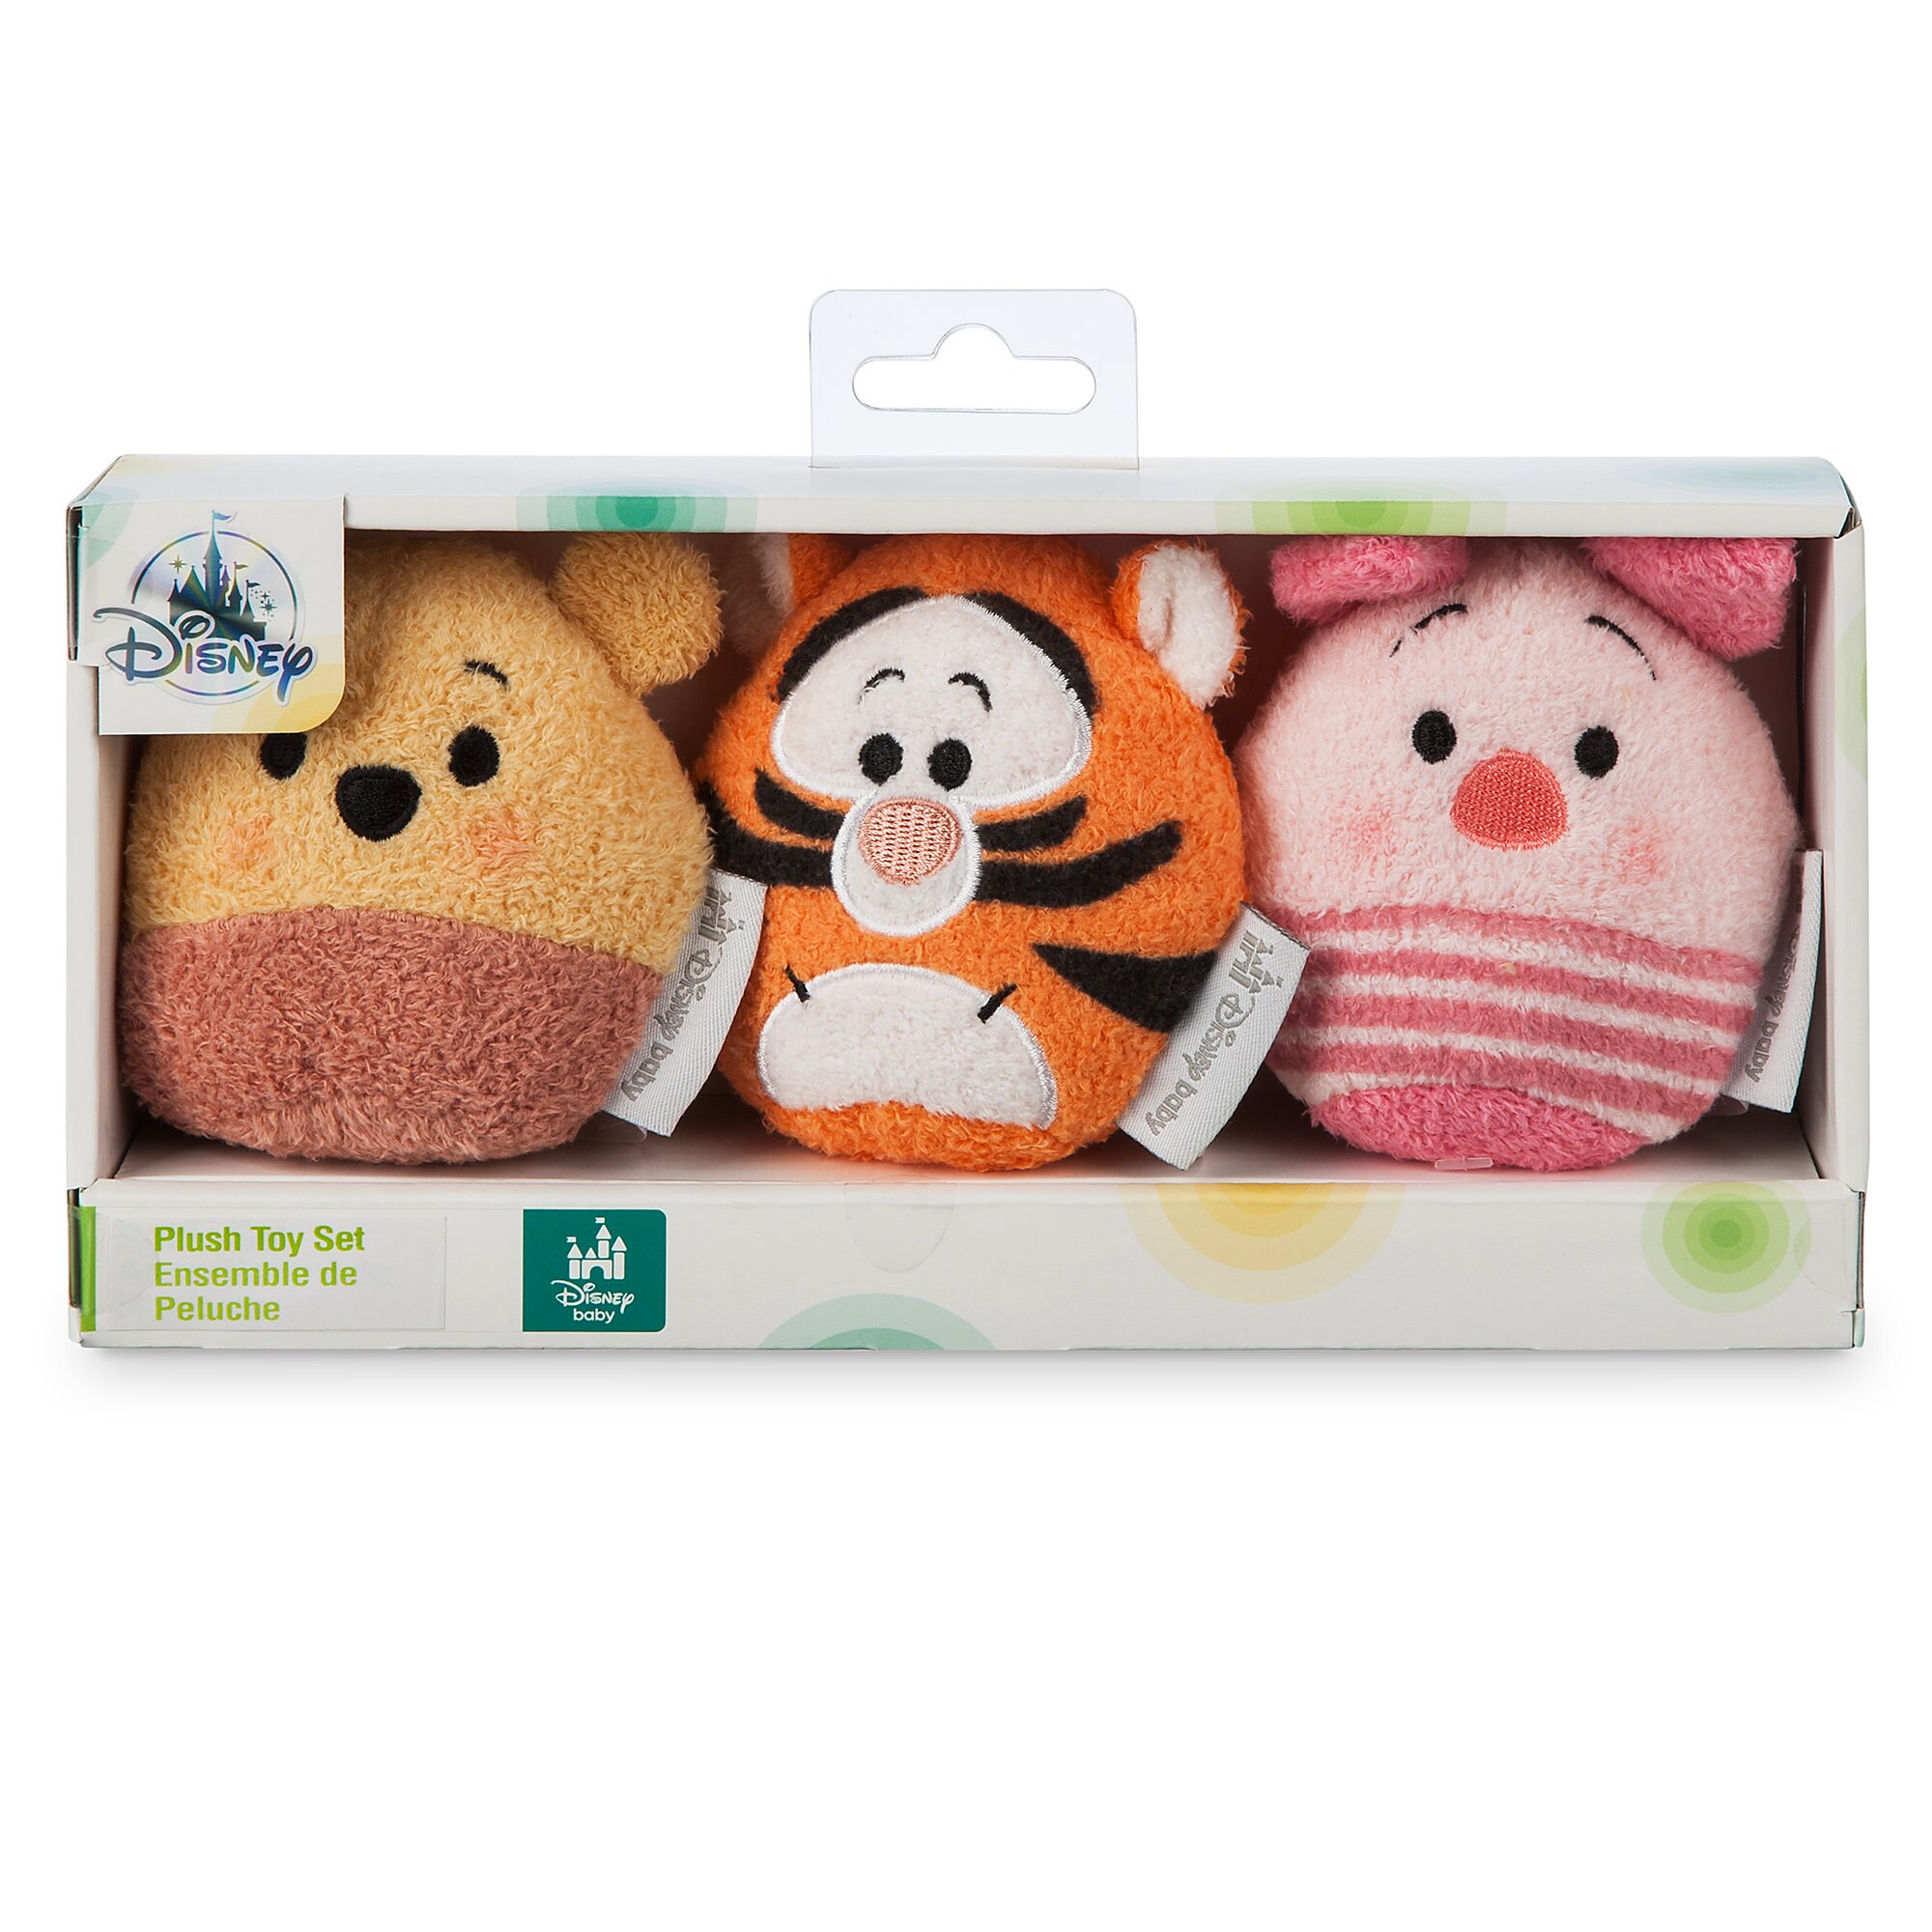 Winnie the Pooh Plush Toy Set for Baby